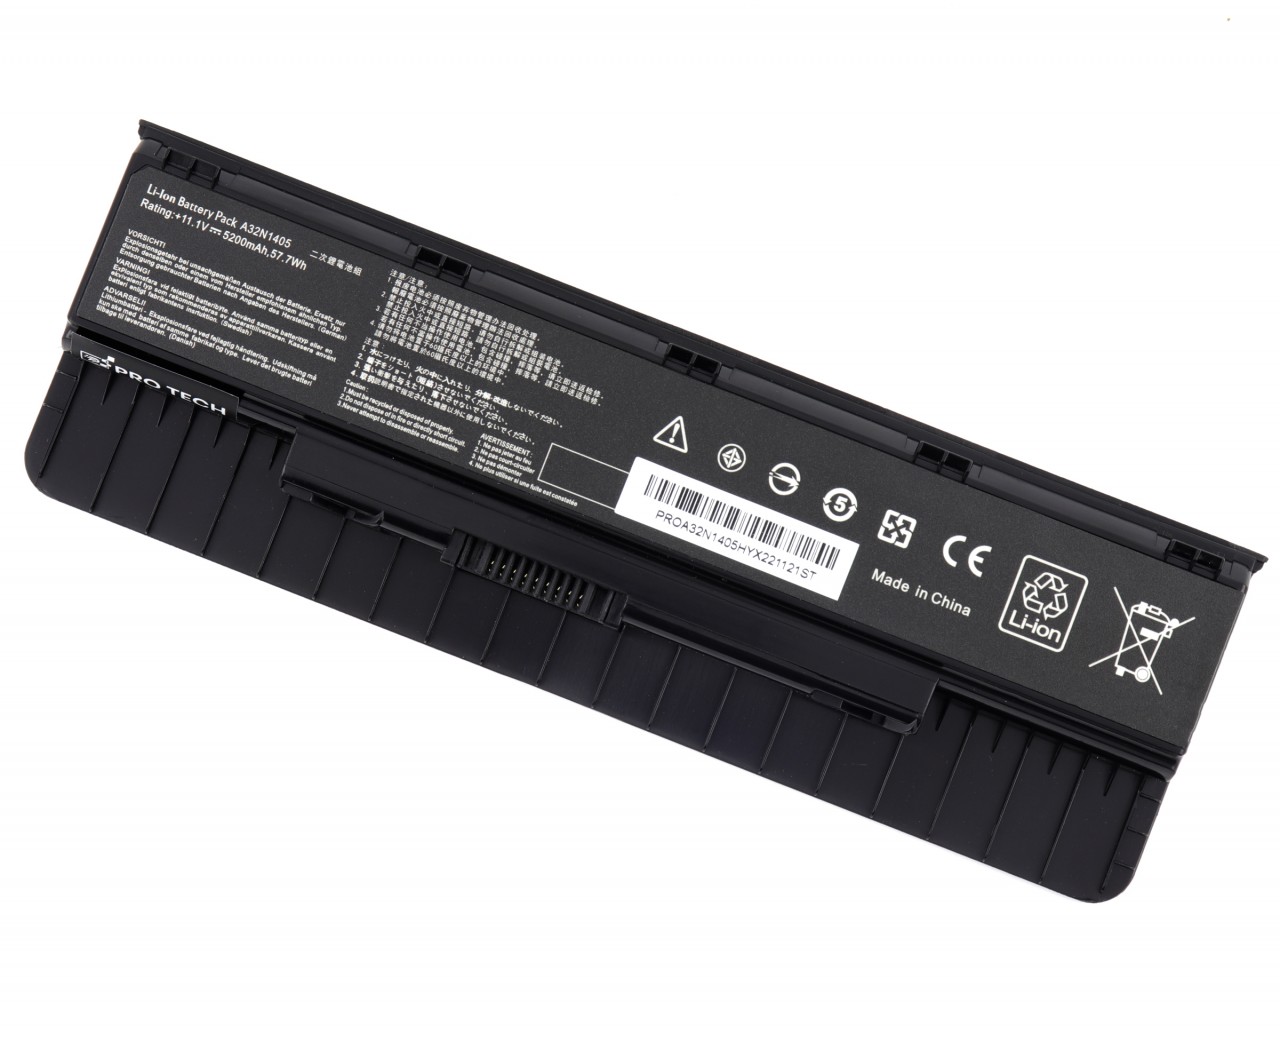 Baterie Asus N76VJ-T5014H 57.7Wh / 5200mAh Protech High Quality Replacement